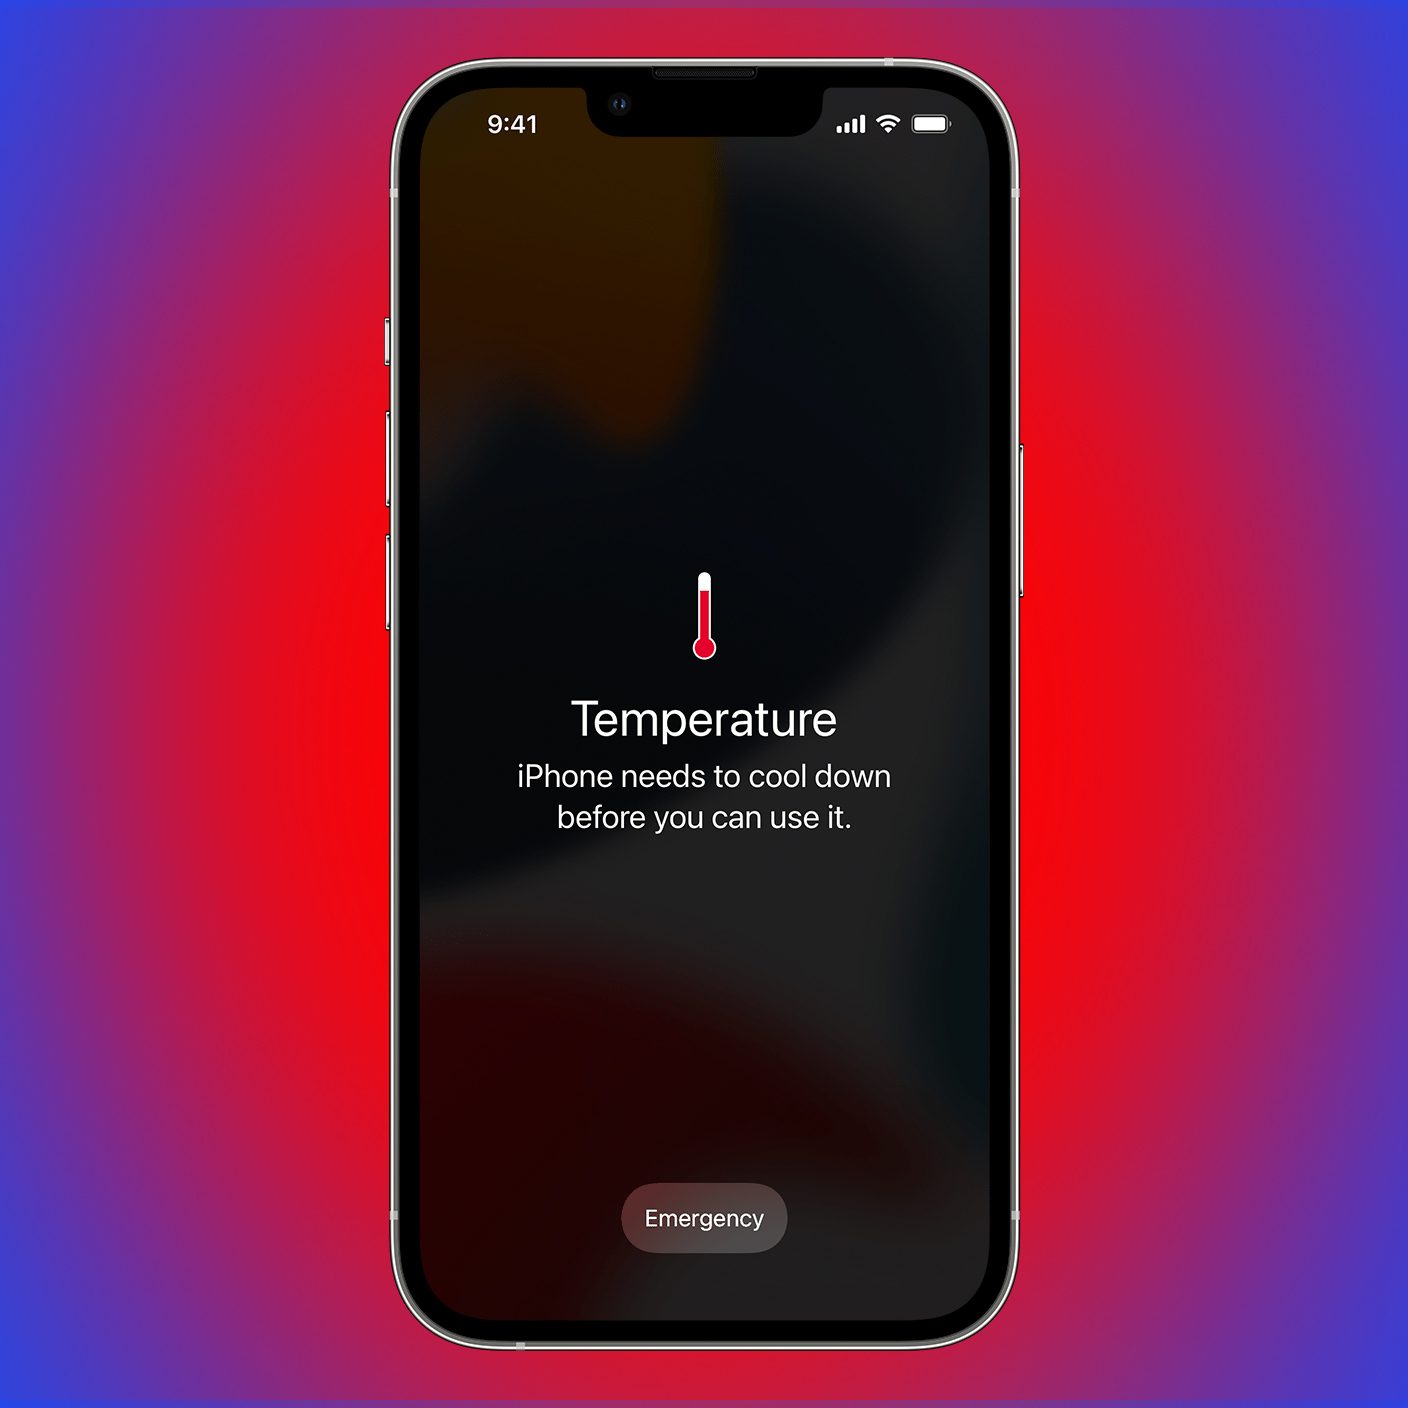 Titanium design compromised heat dissipation, iPhone 15 users report heat  issue - Huawei Central